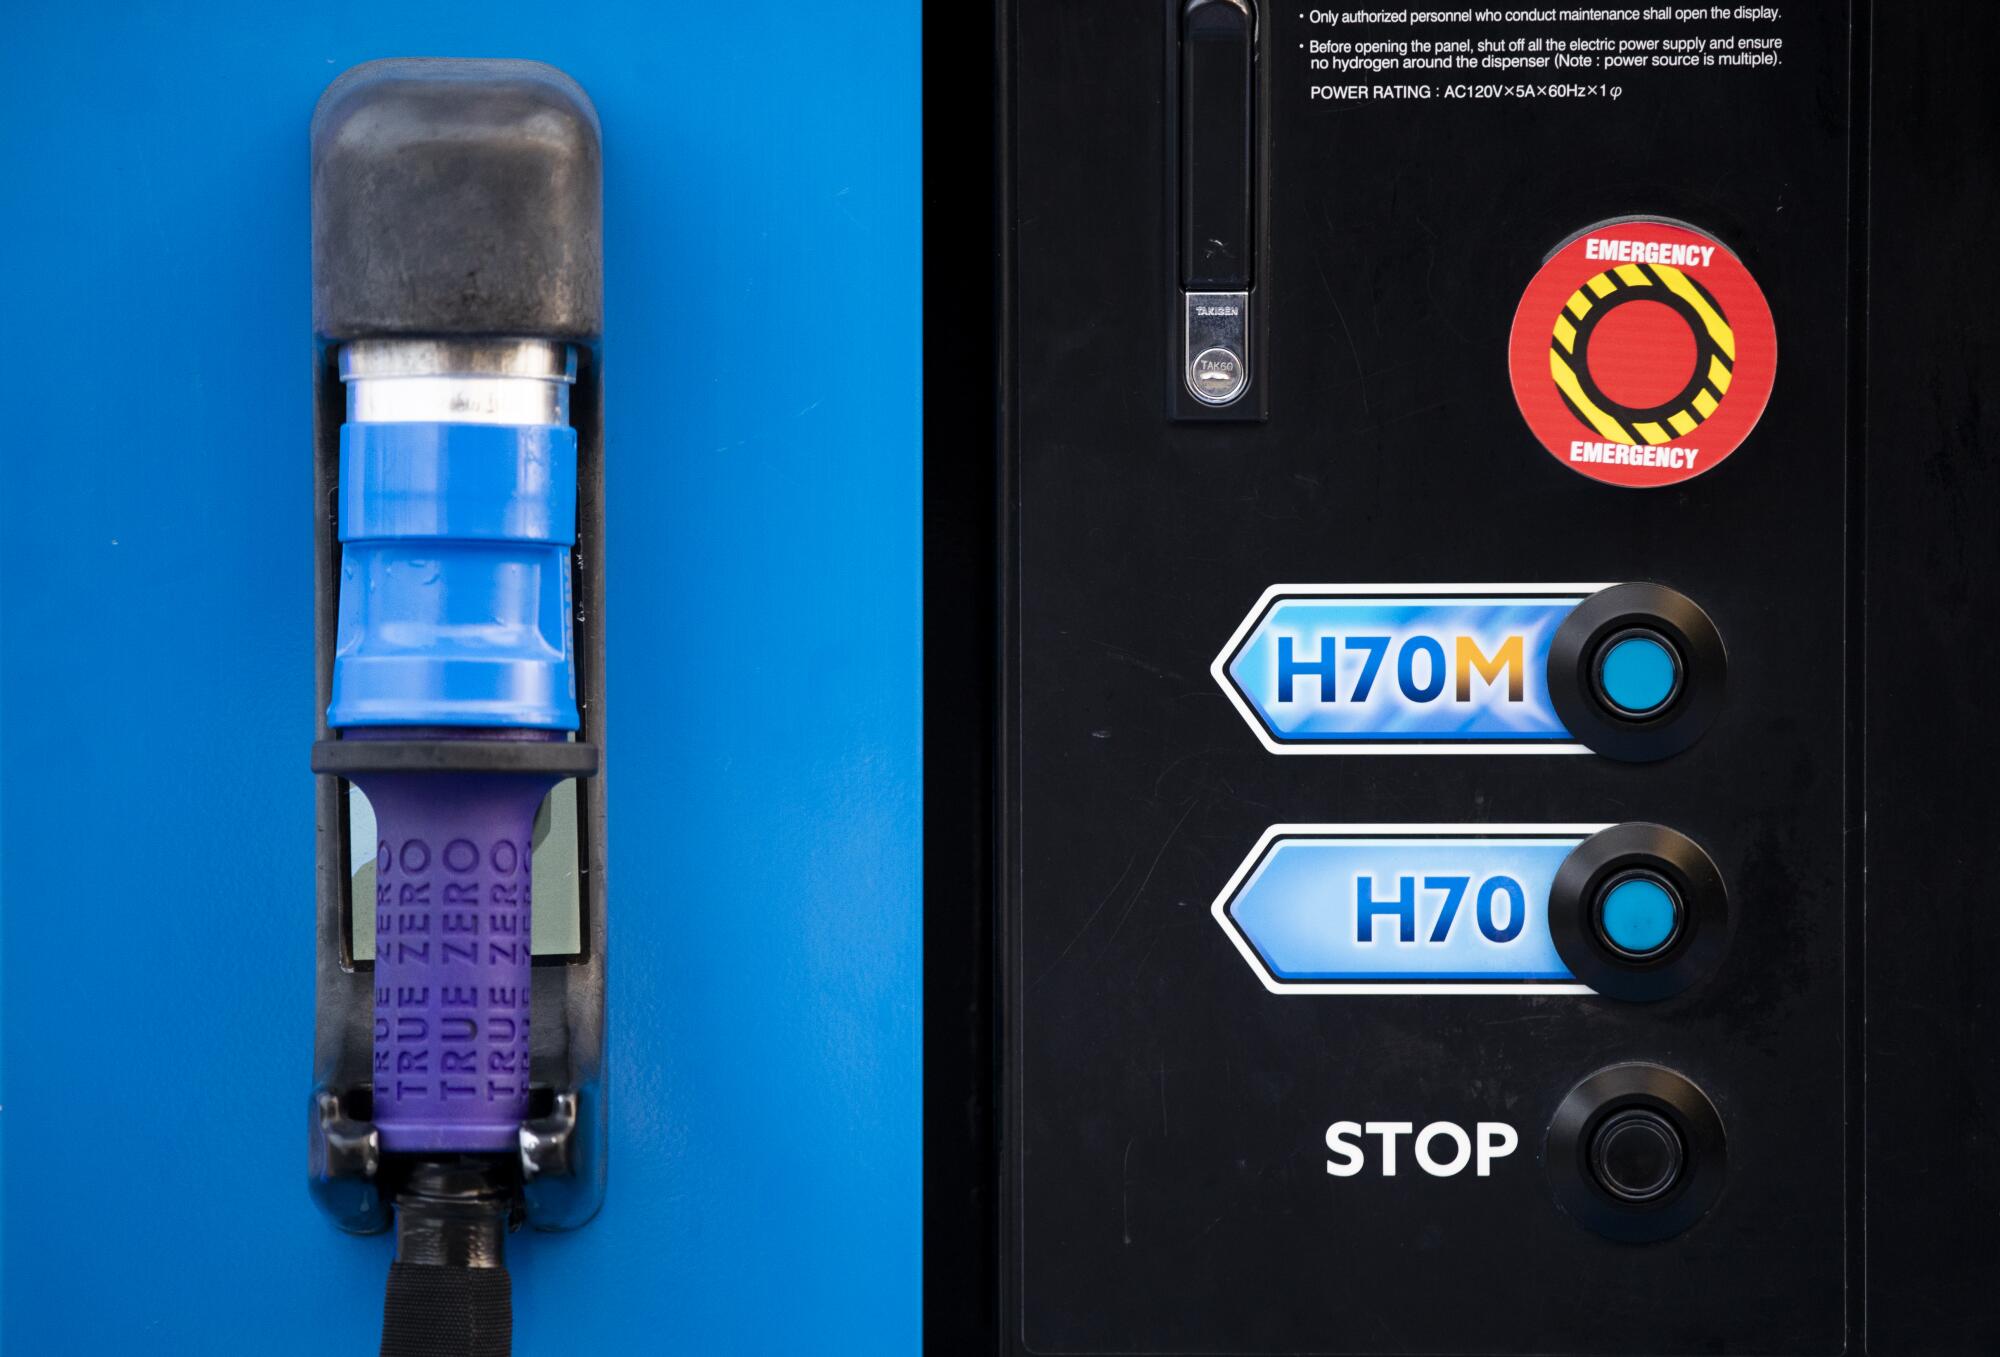 A fuel station for hydrogen cars.